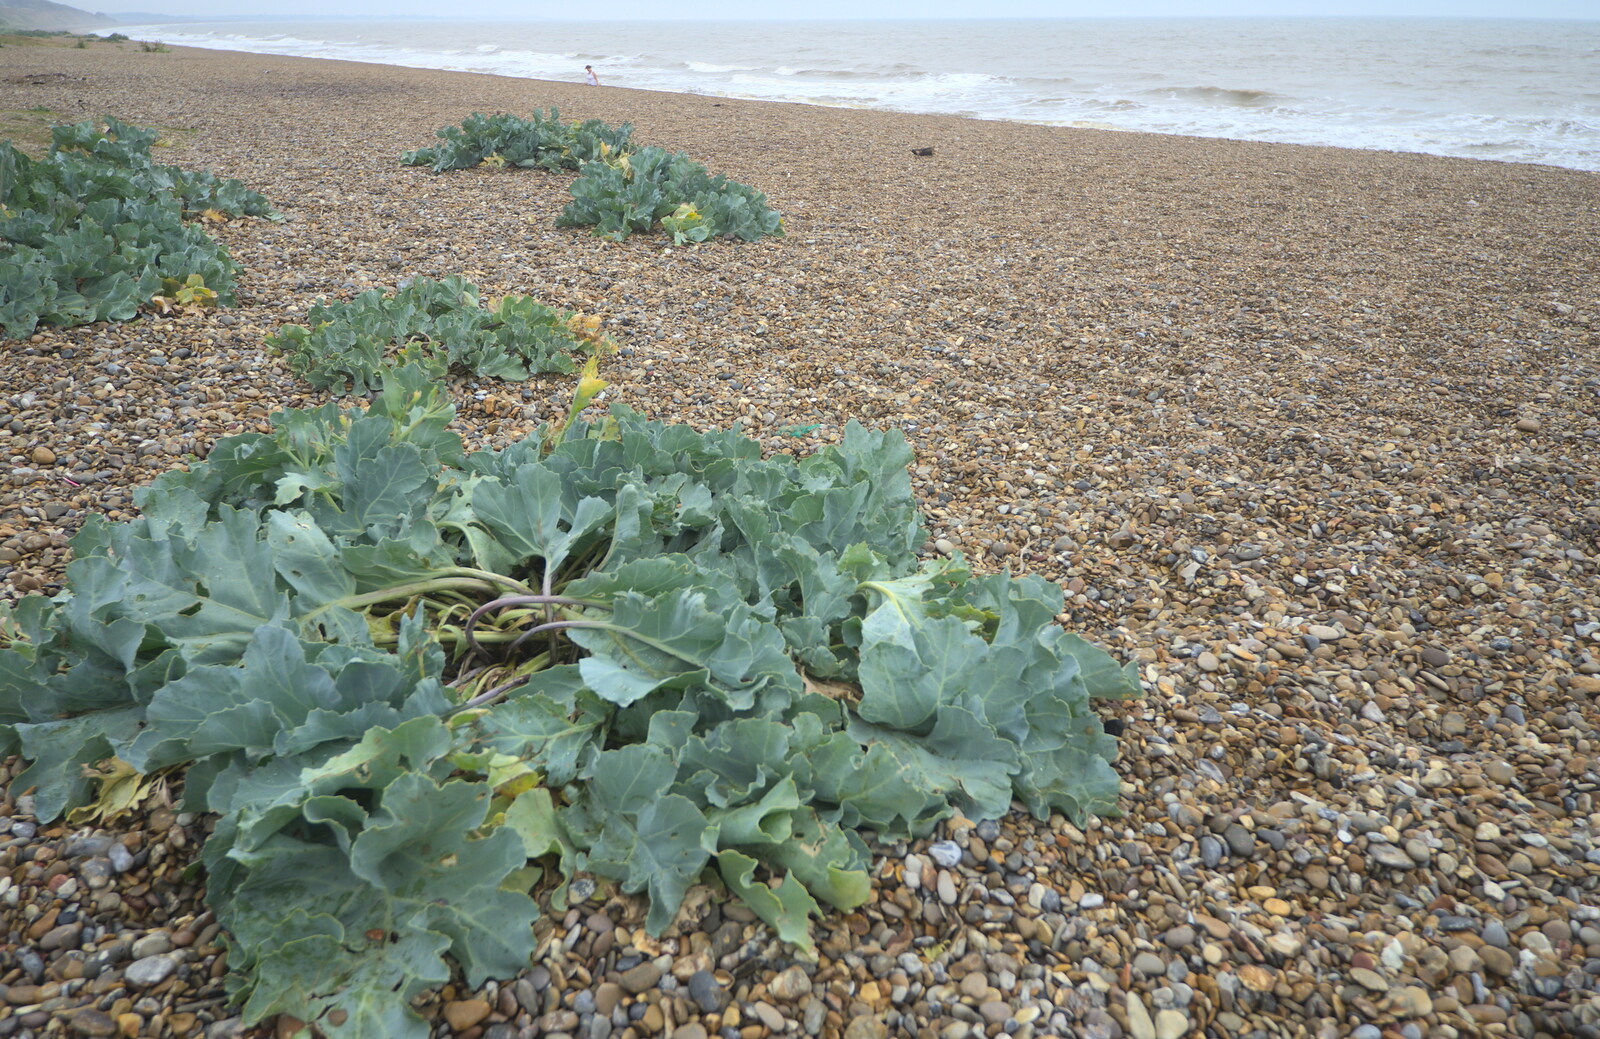 Sea Kale on Dunwich beach from Camping by the Seaside, Cliff House, Dunwich, Suffolk - 15th August 2012